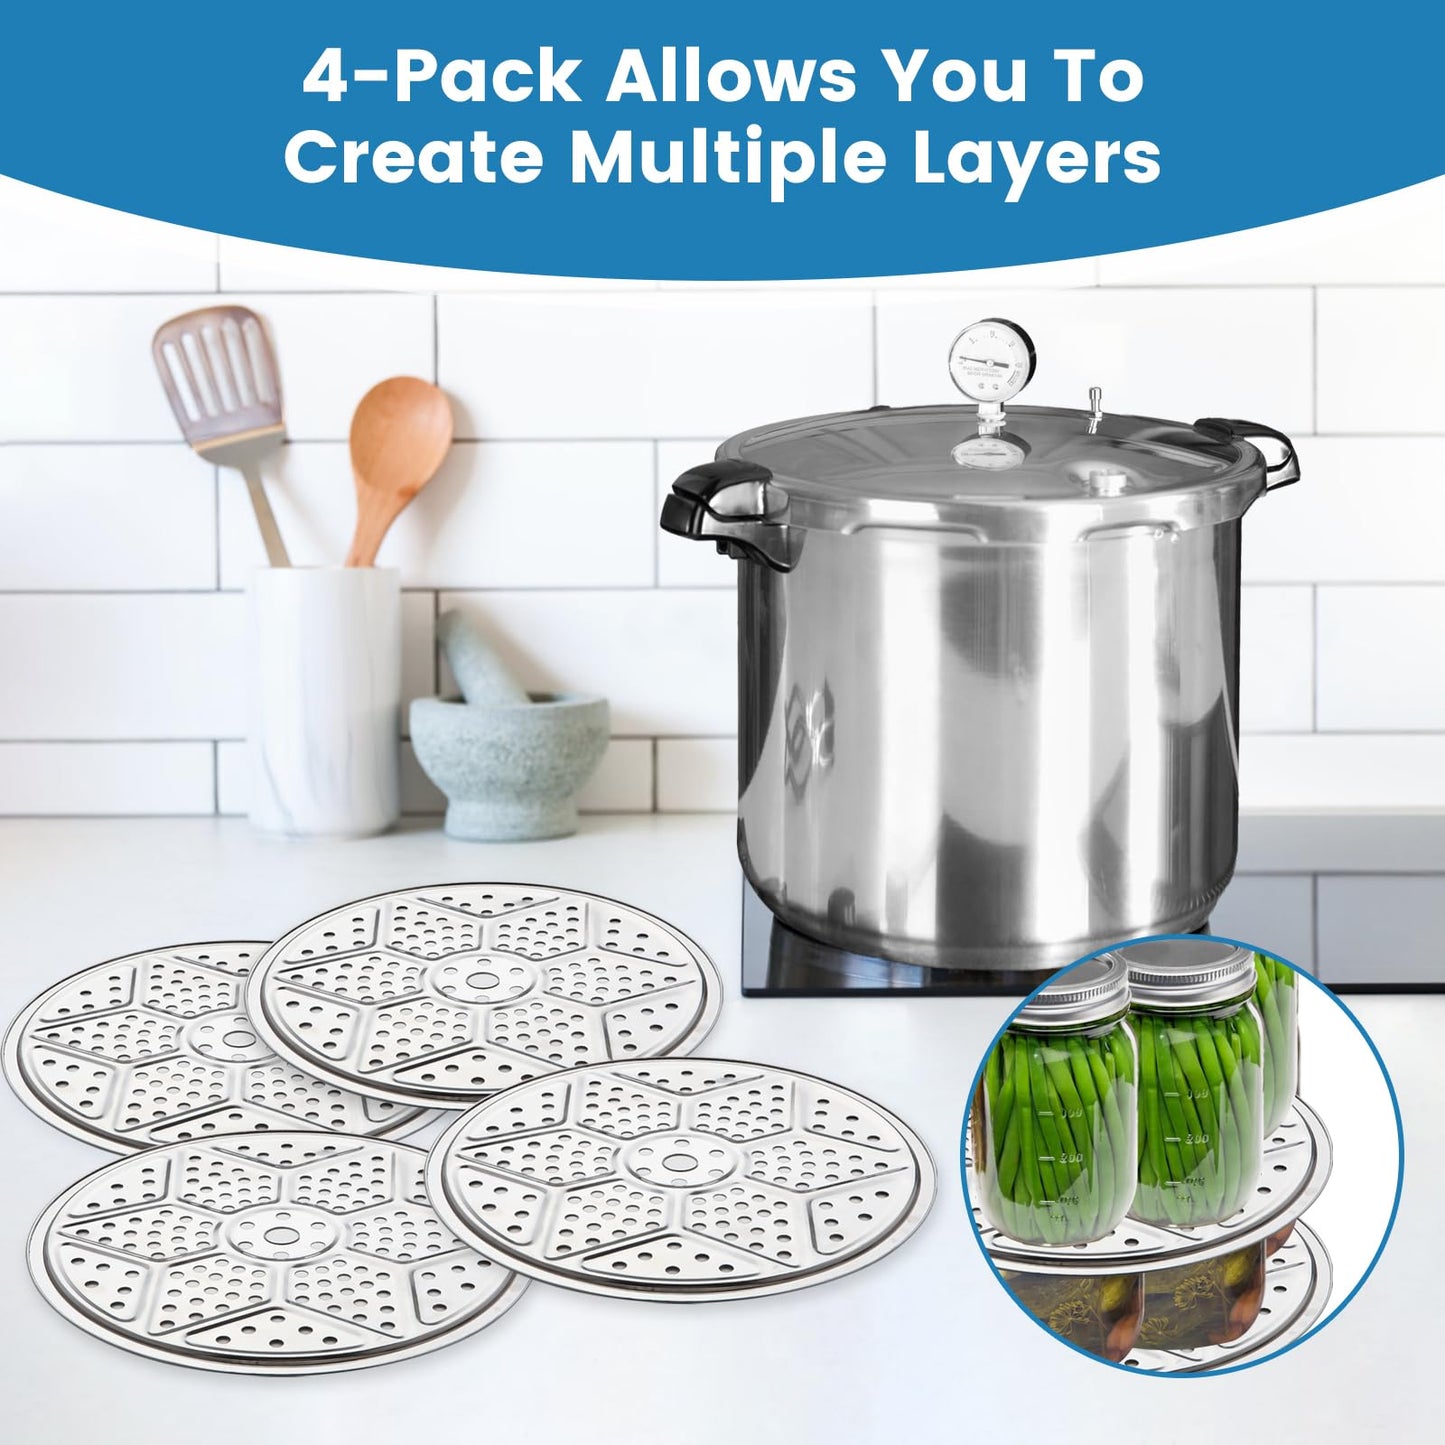 aoulela 4Pack Pressure Canner Rack, Stainless Steel Canning Rack for Pressure Cooker, 11 Inch Canning Rack for Water Bath Canner, Canning Supplies, Compatible with Presto, All American and More